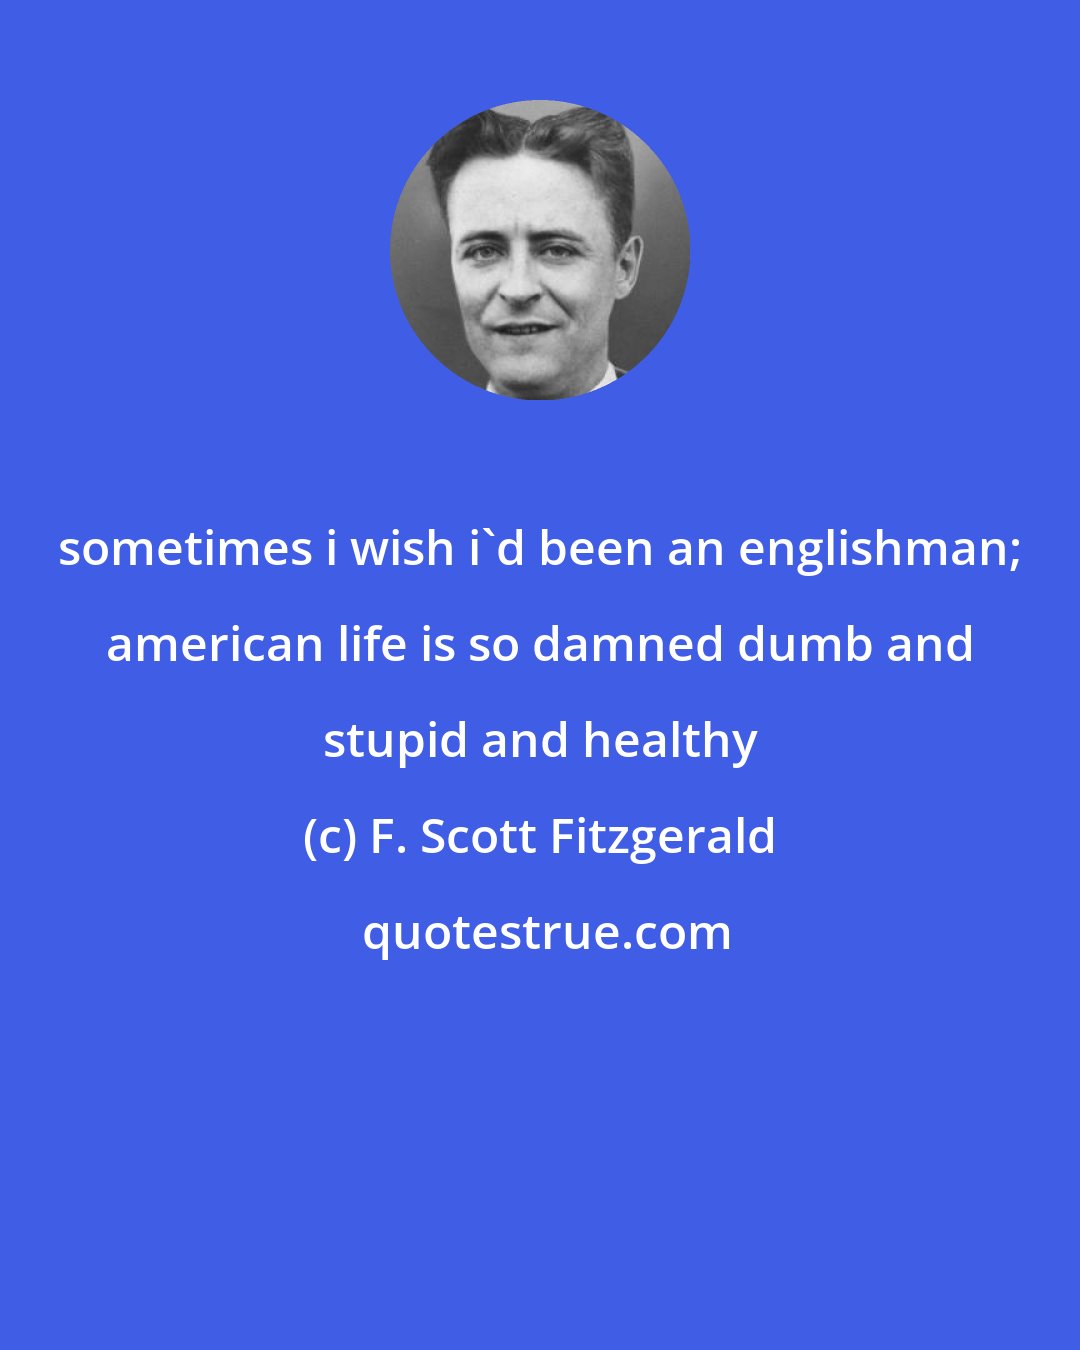 F. Scott Fitzgerald: sometimes i wish i'd been an englishman; american life is so damned dumb and stupid and healthy